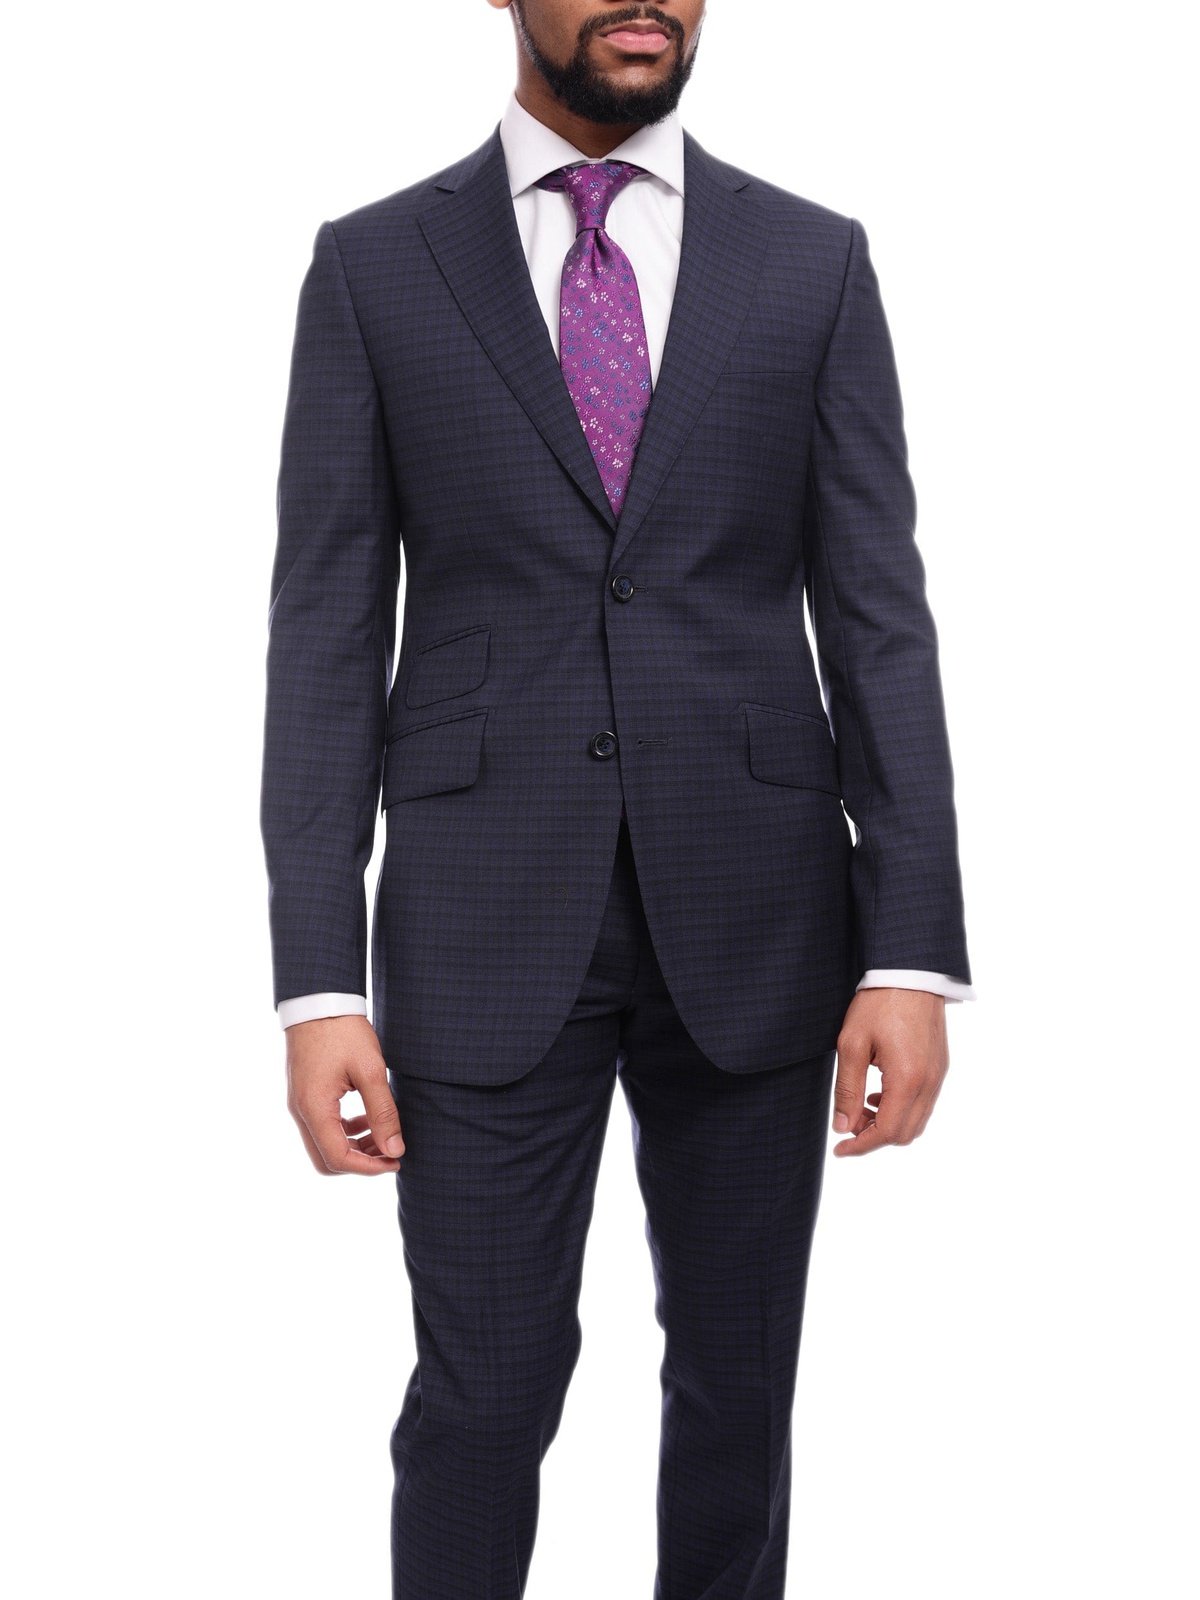 Napoli TWO PIECE SUITS Napoli Slim Fit Blue & Black Check Two Button Half Canvassed Wool Suit